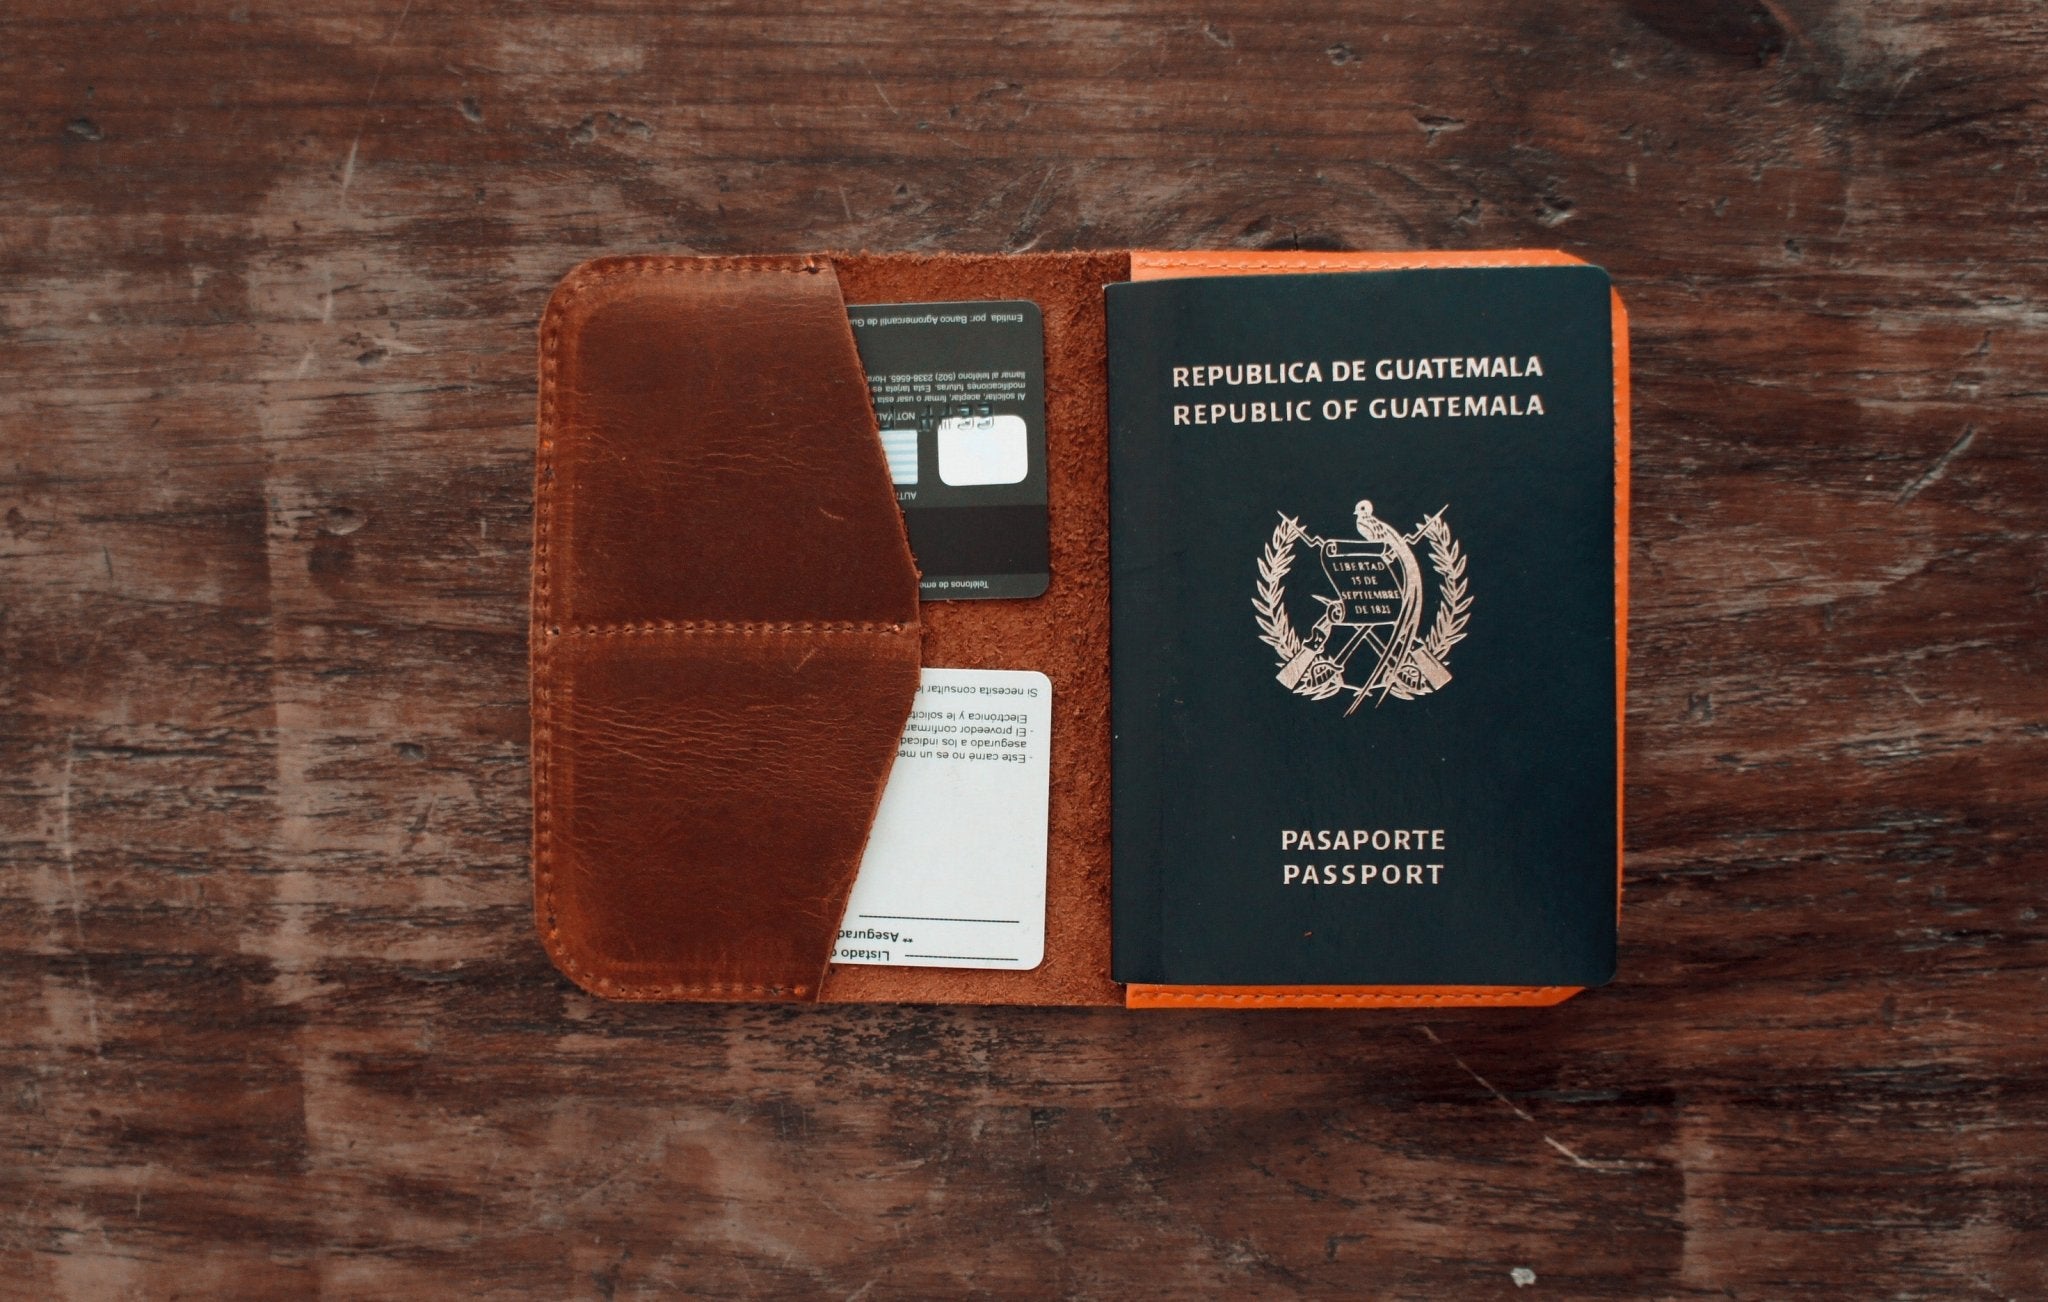 The Passport - SIMPLE Leather Goods